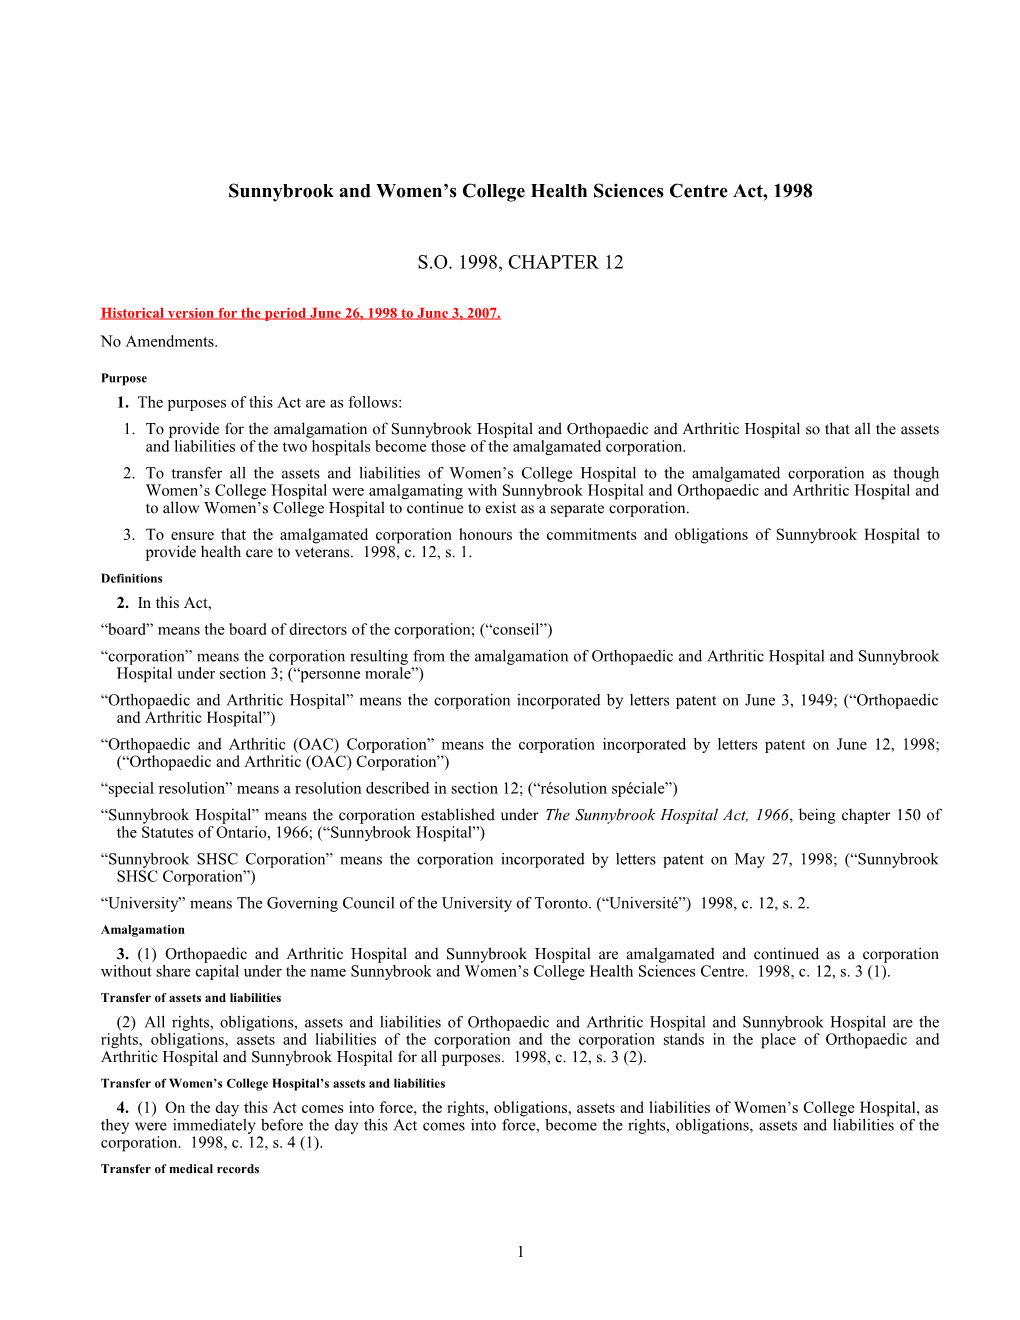 Sunnybrook and Women's College Health Sciences Centre Act, 1998, S.O. 1998, C. 12